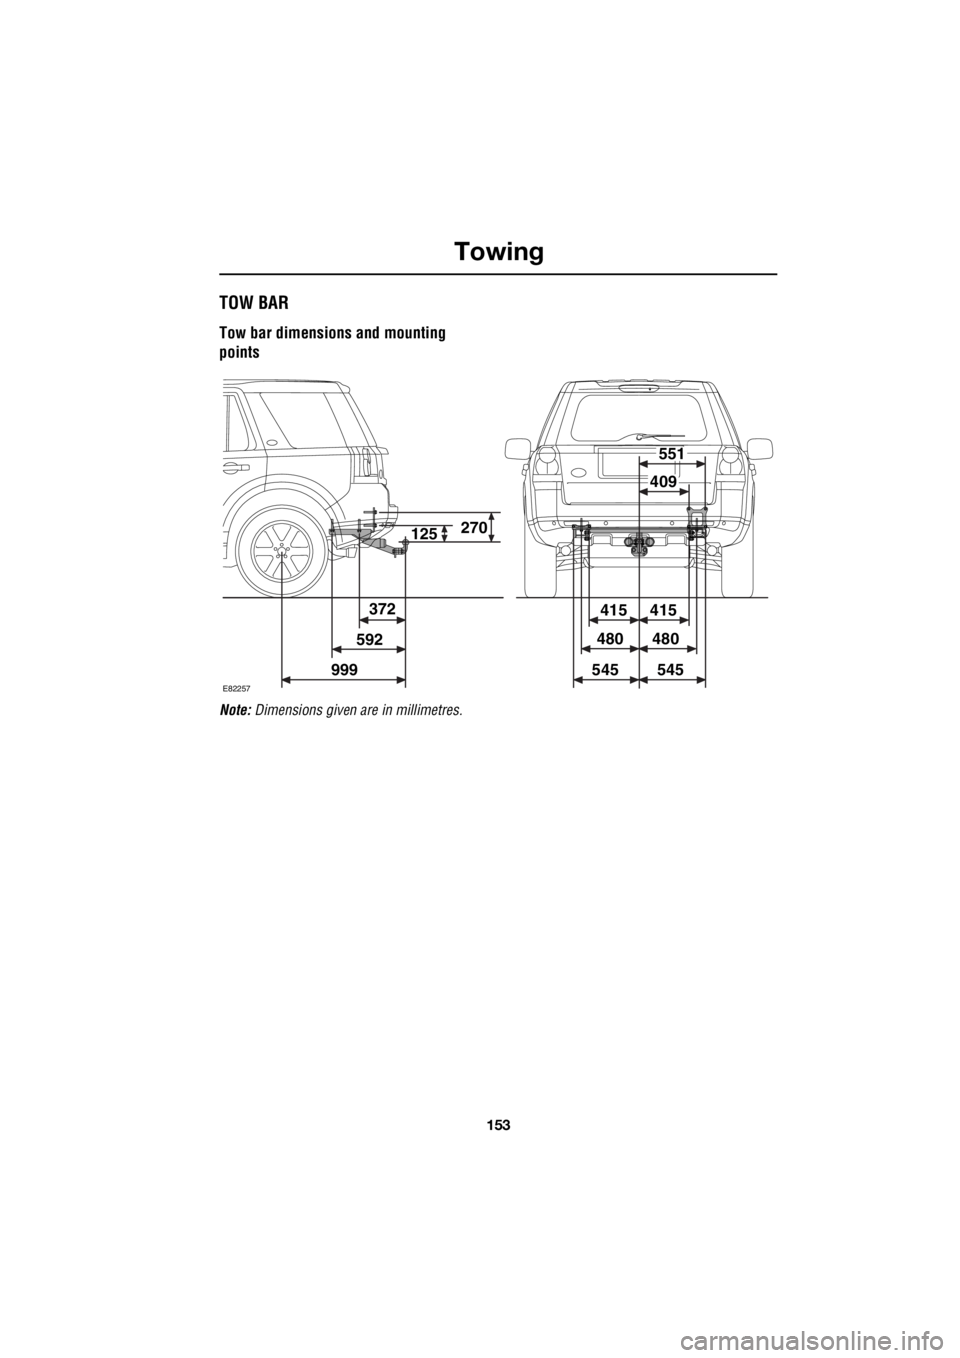 LAND ROVER FRELANDER 2 2006  Repair Manual 153
Towing
R
TOW BAR
Tow bar dimensions and mounting  
points
Note:   Dimensions given are in millimetres.
125270
415415
480480
545545
409
551
E82257
372 
592 
999 